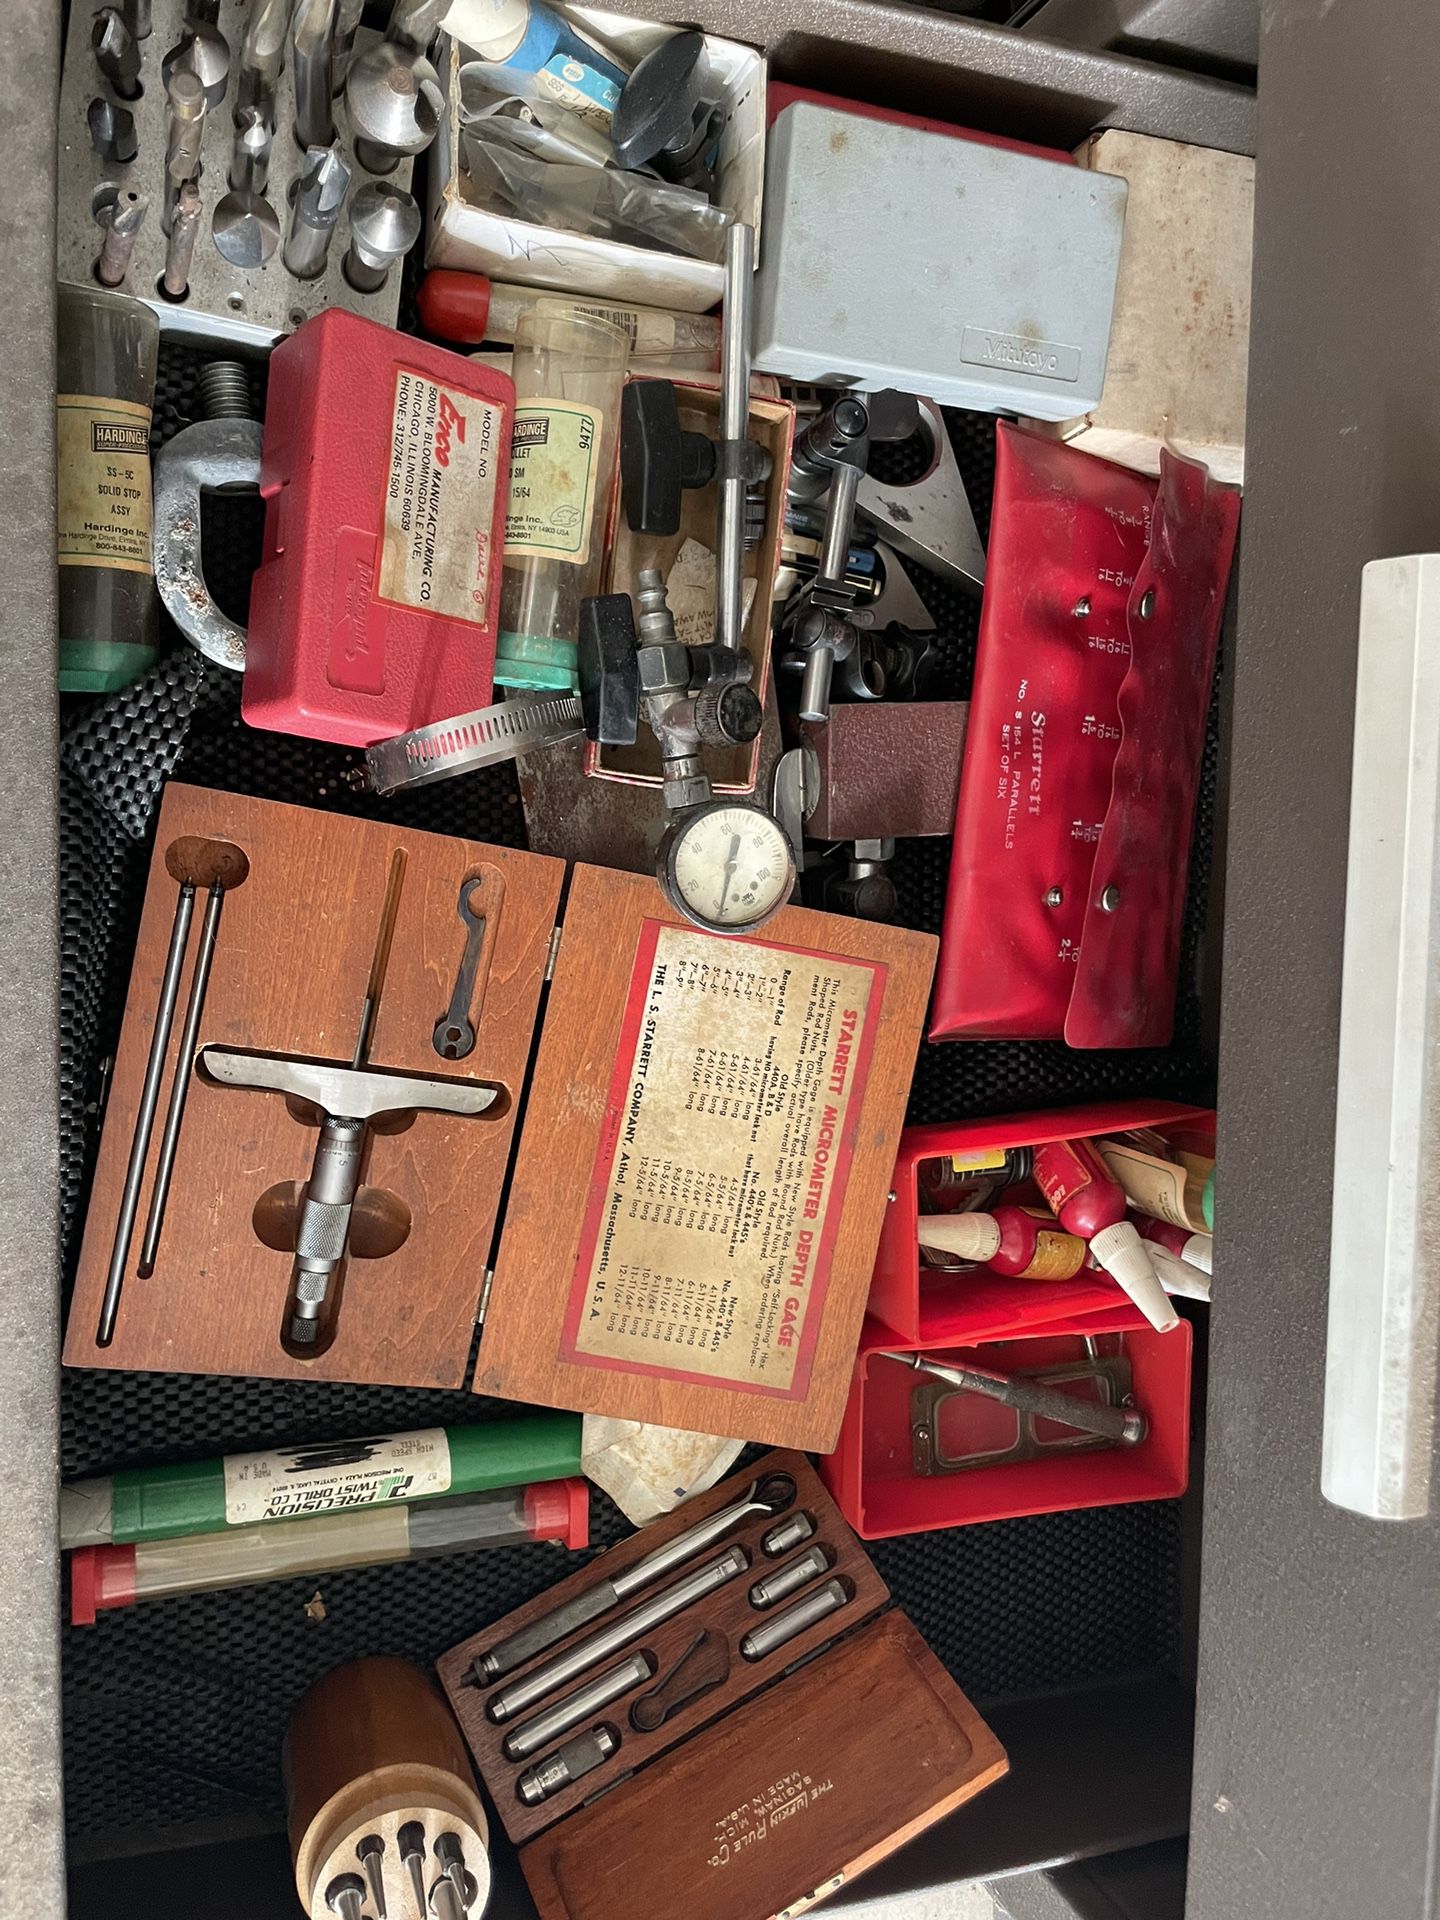 Jack Pot (Machinist Tools)Tool Box Not Included